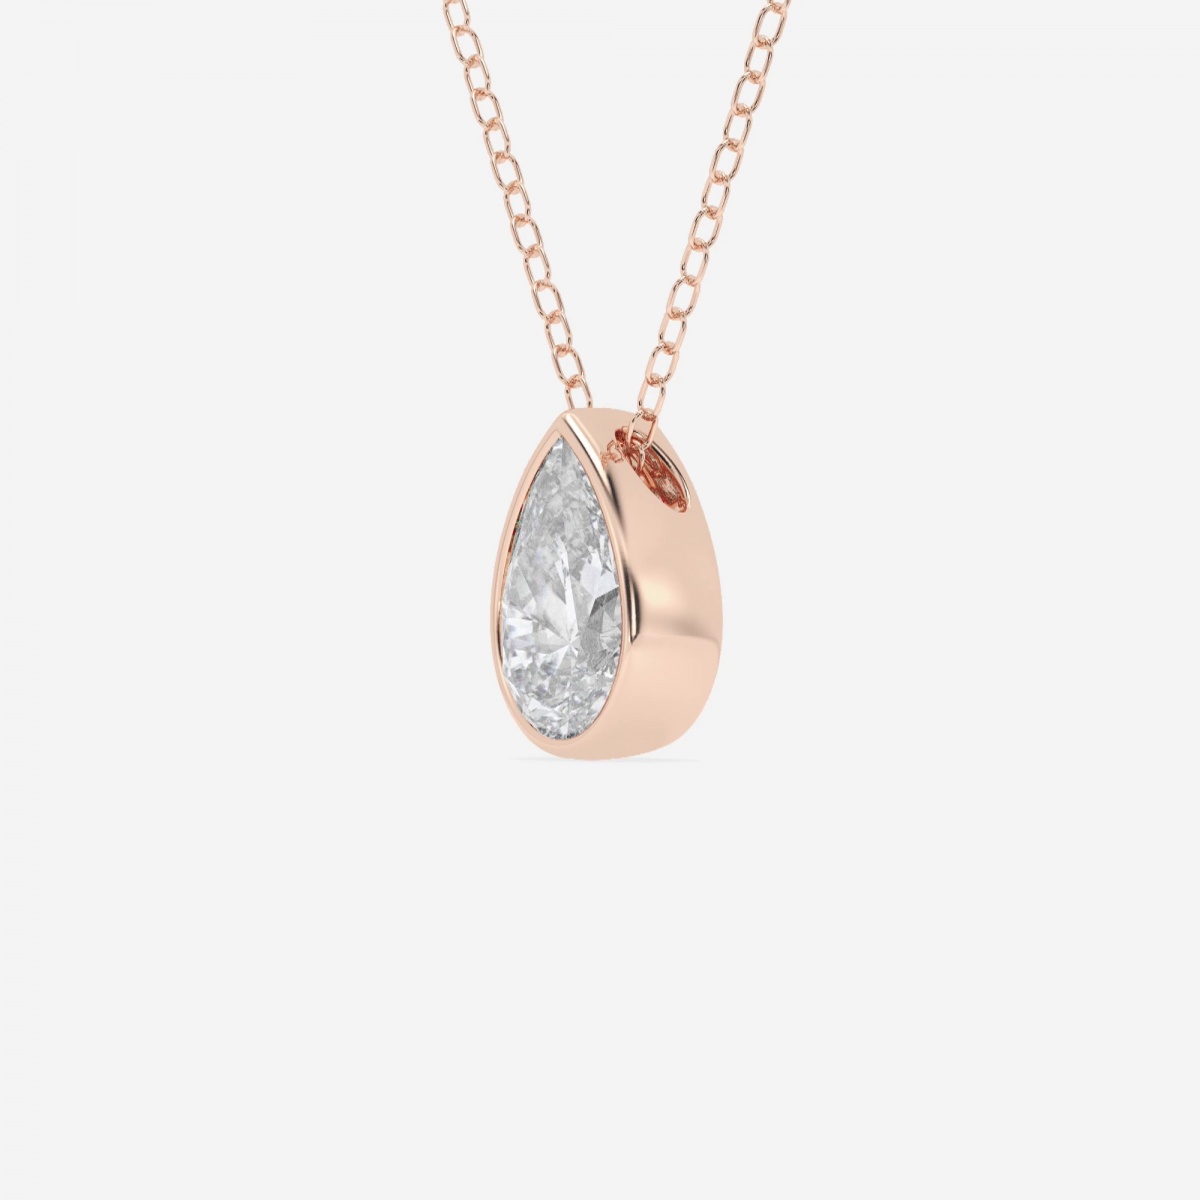 Additional Image 1 for  1 ctw Pear Lab Grown Diamond Bezel Set Solitaire Pendant with Adjustable Chain